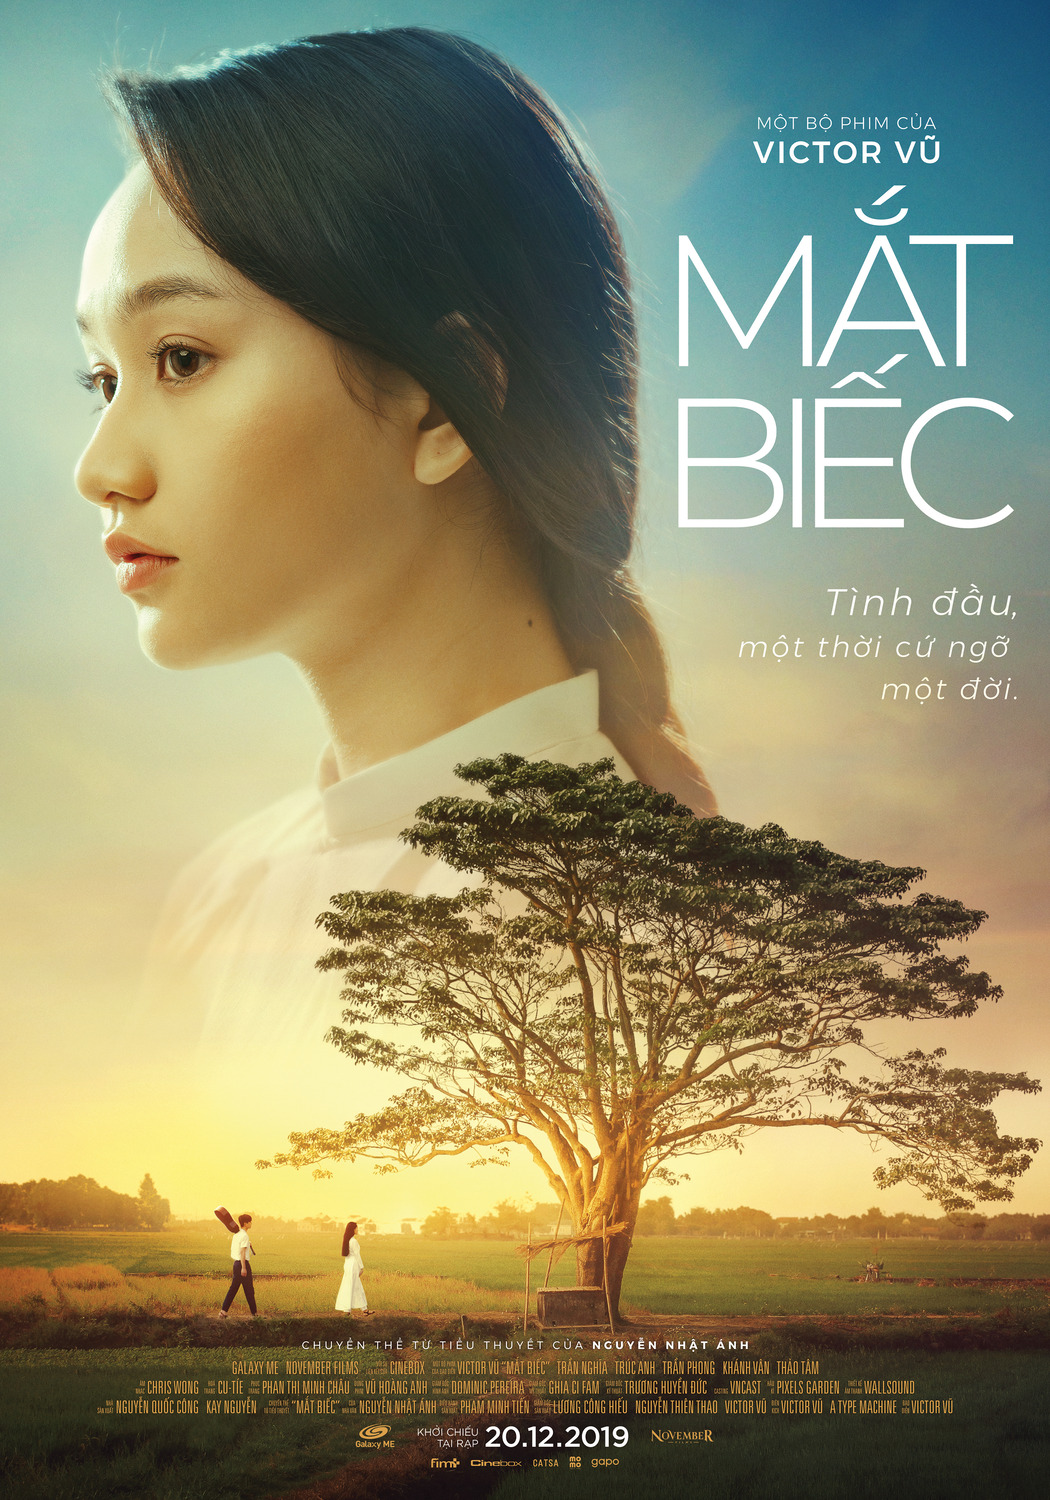 Extra Large Movie Poster Image for Mat biec (#3 of 15)